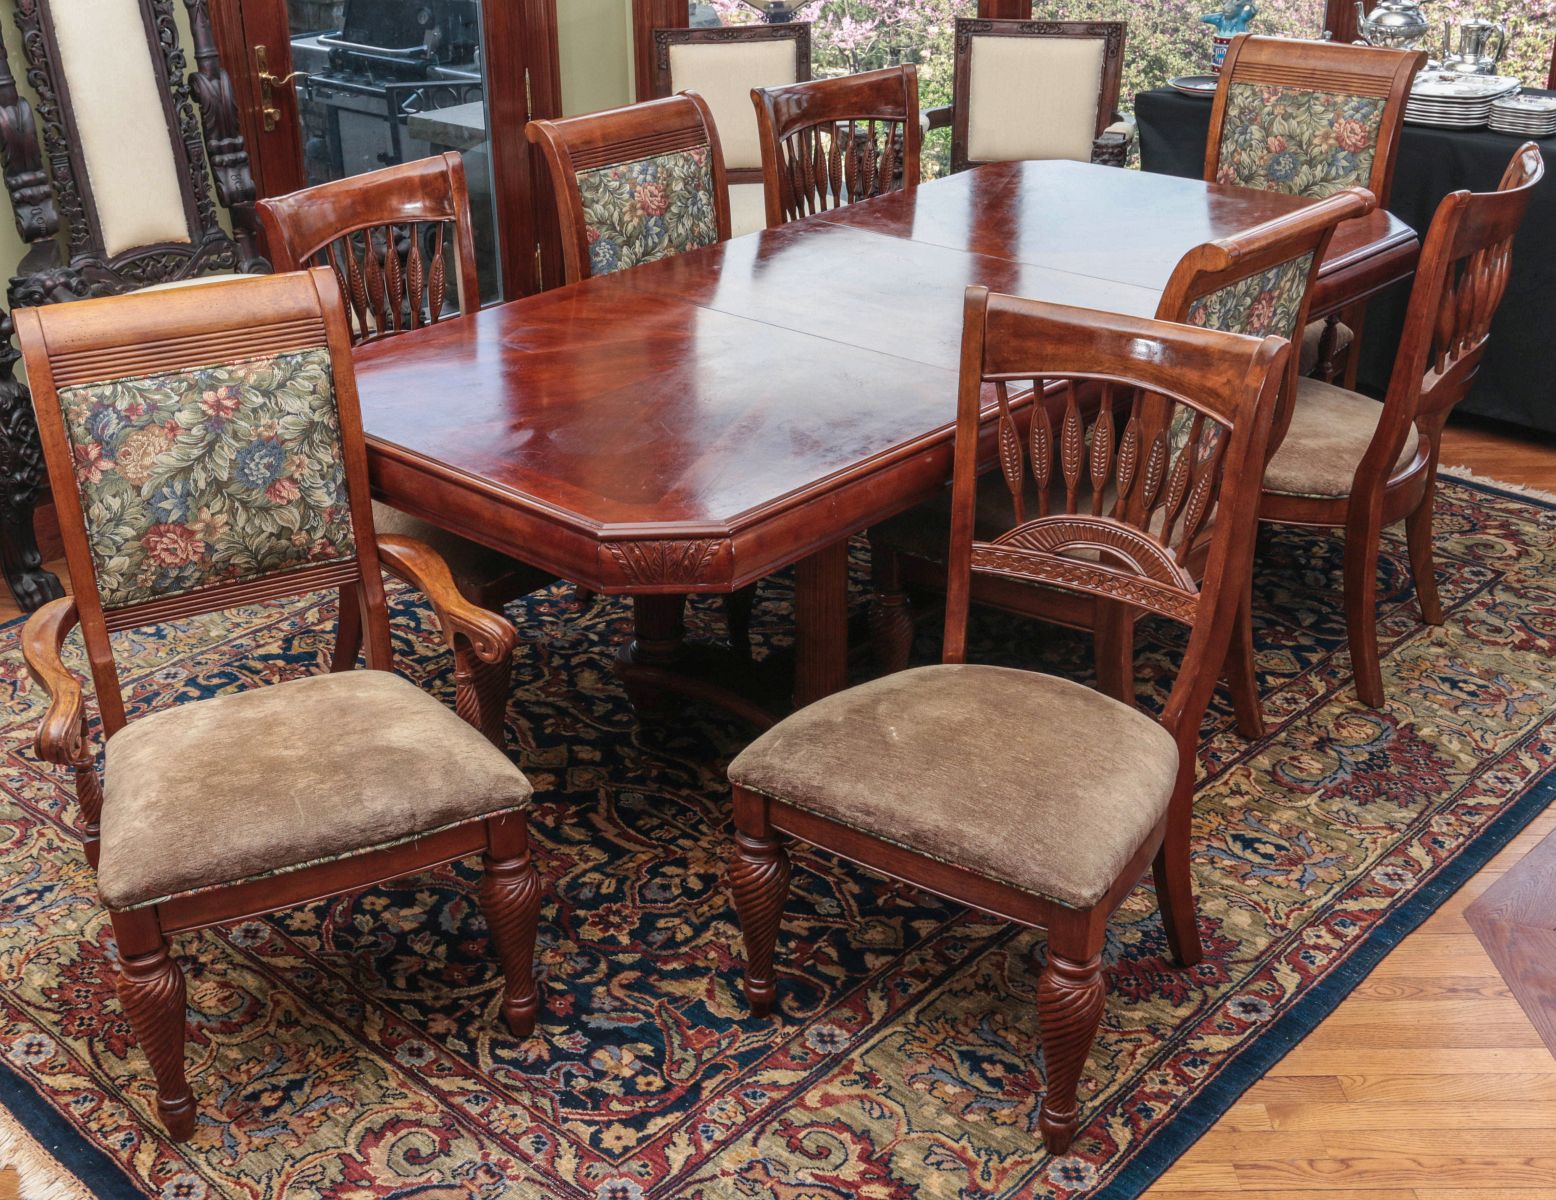 A CARVED MAHOGANY DINING TABLE WITH EIGHT CHAIRS